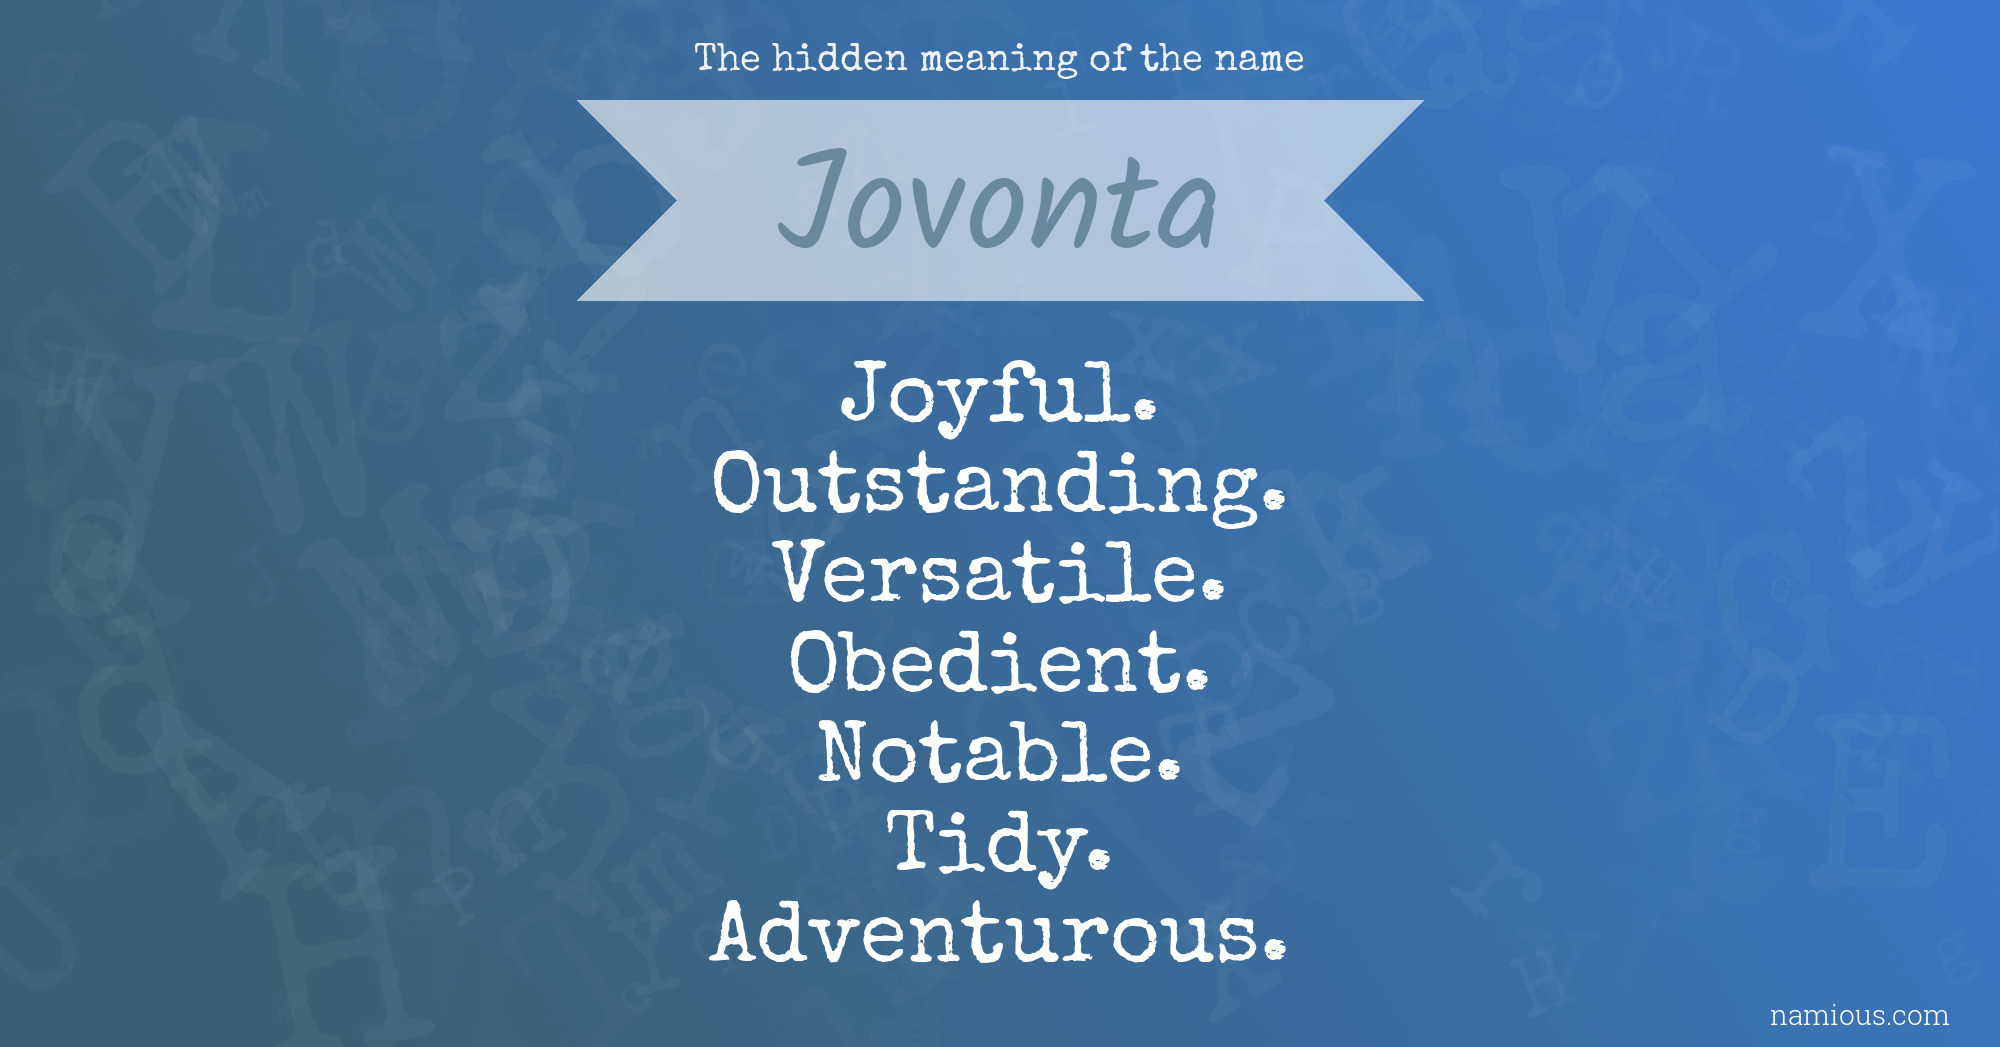 The hidden meaning of the name Jovonta